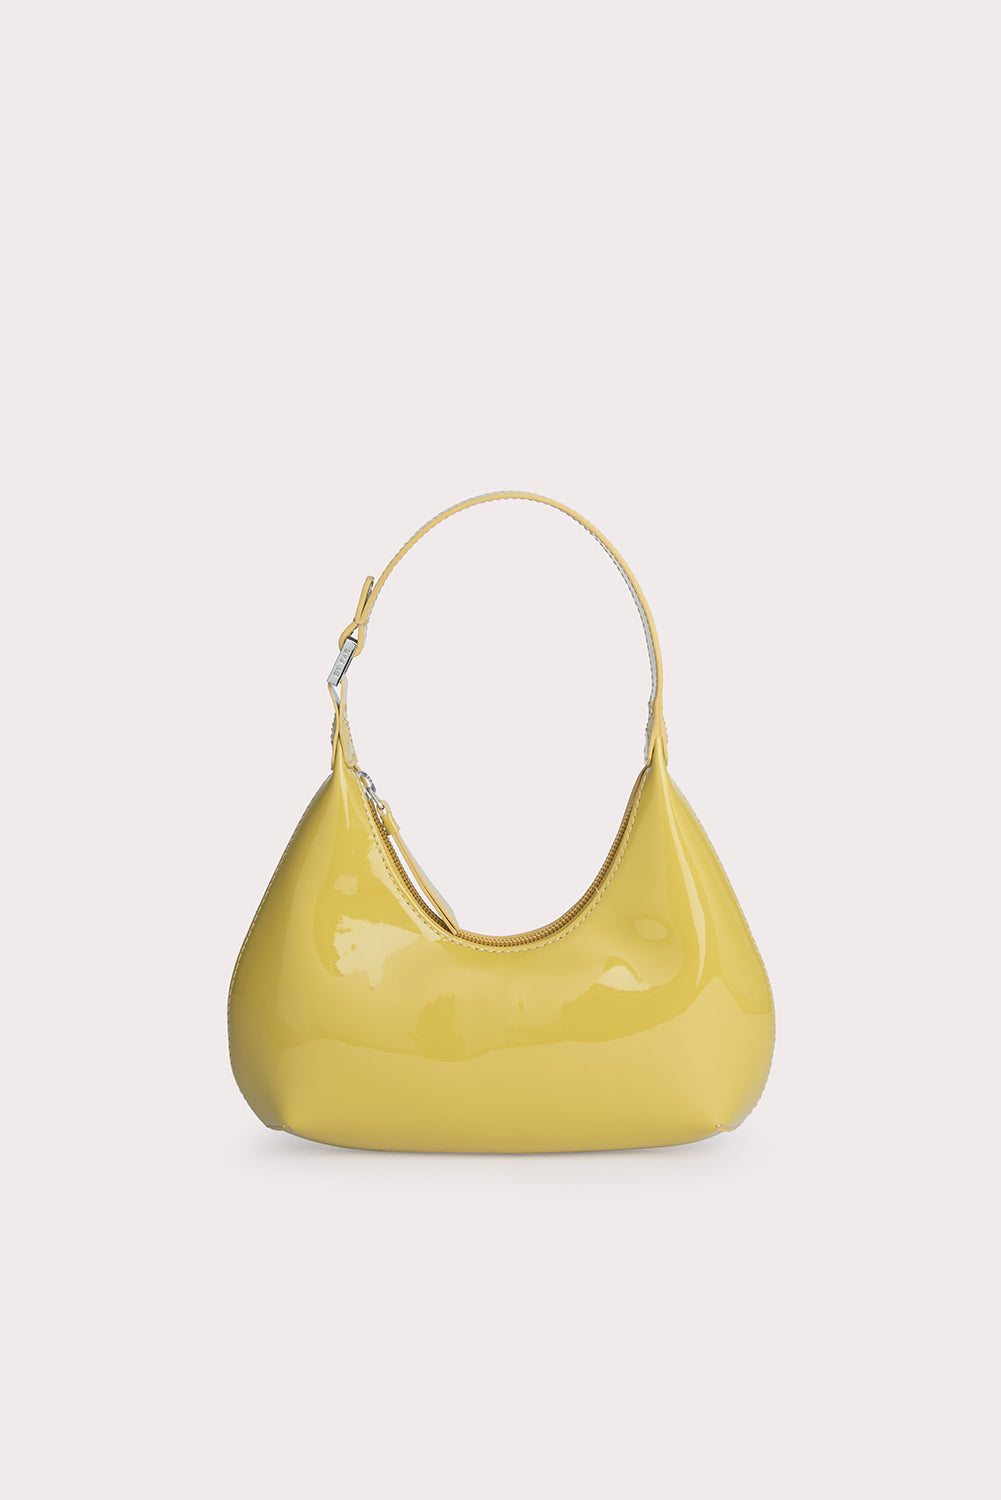 BY FAR Baby Amber Bag